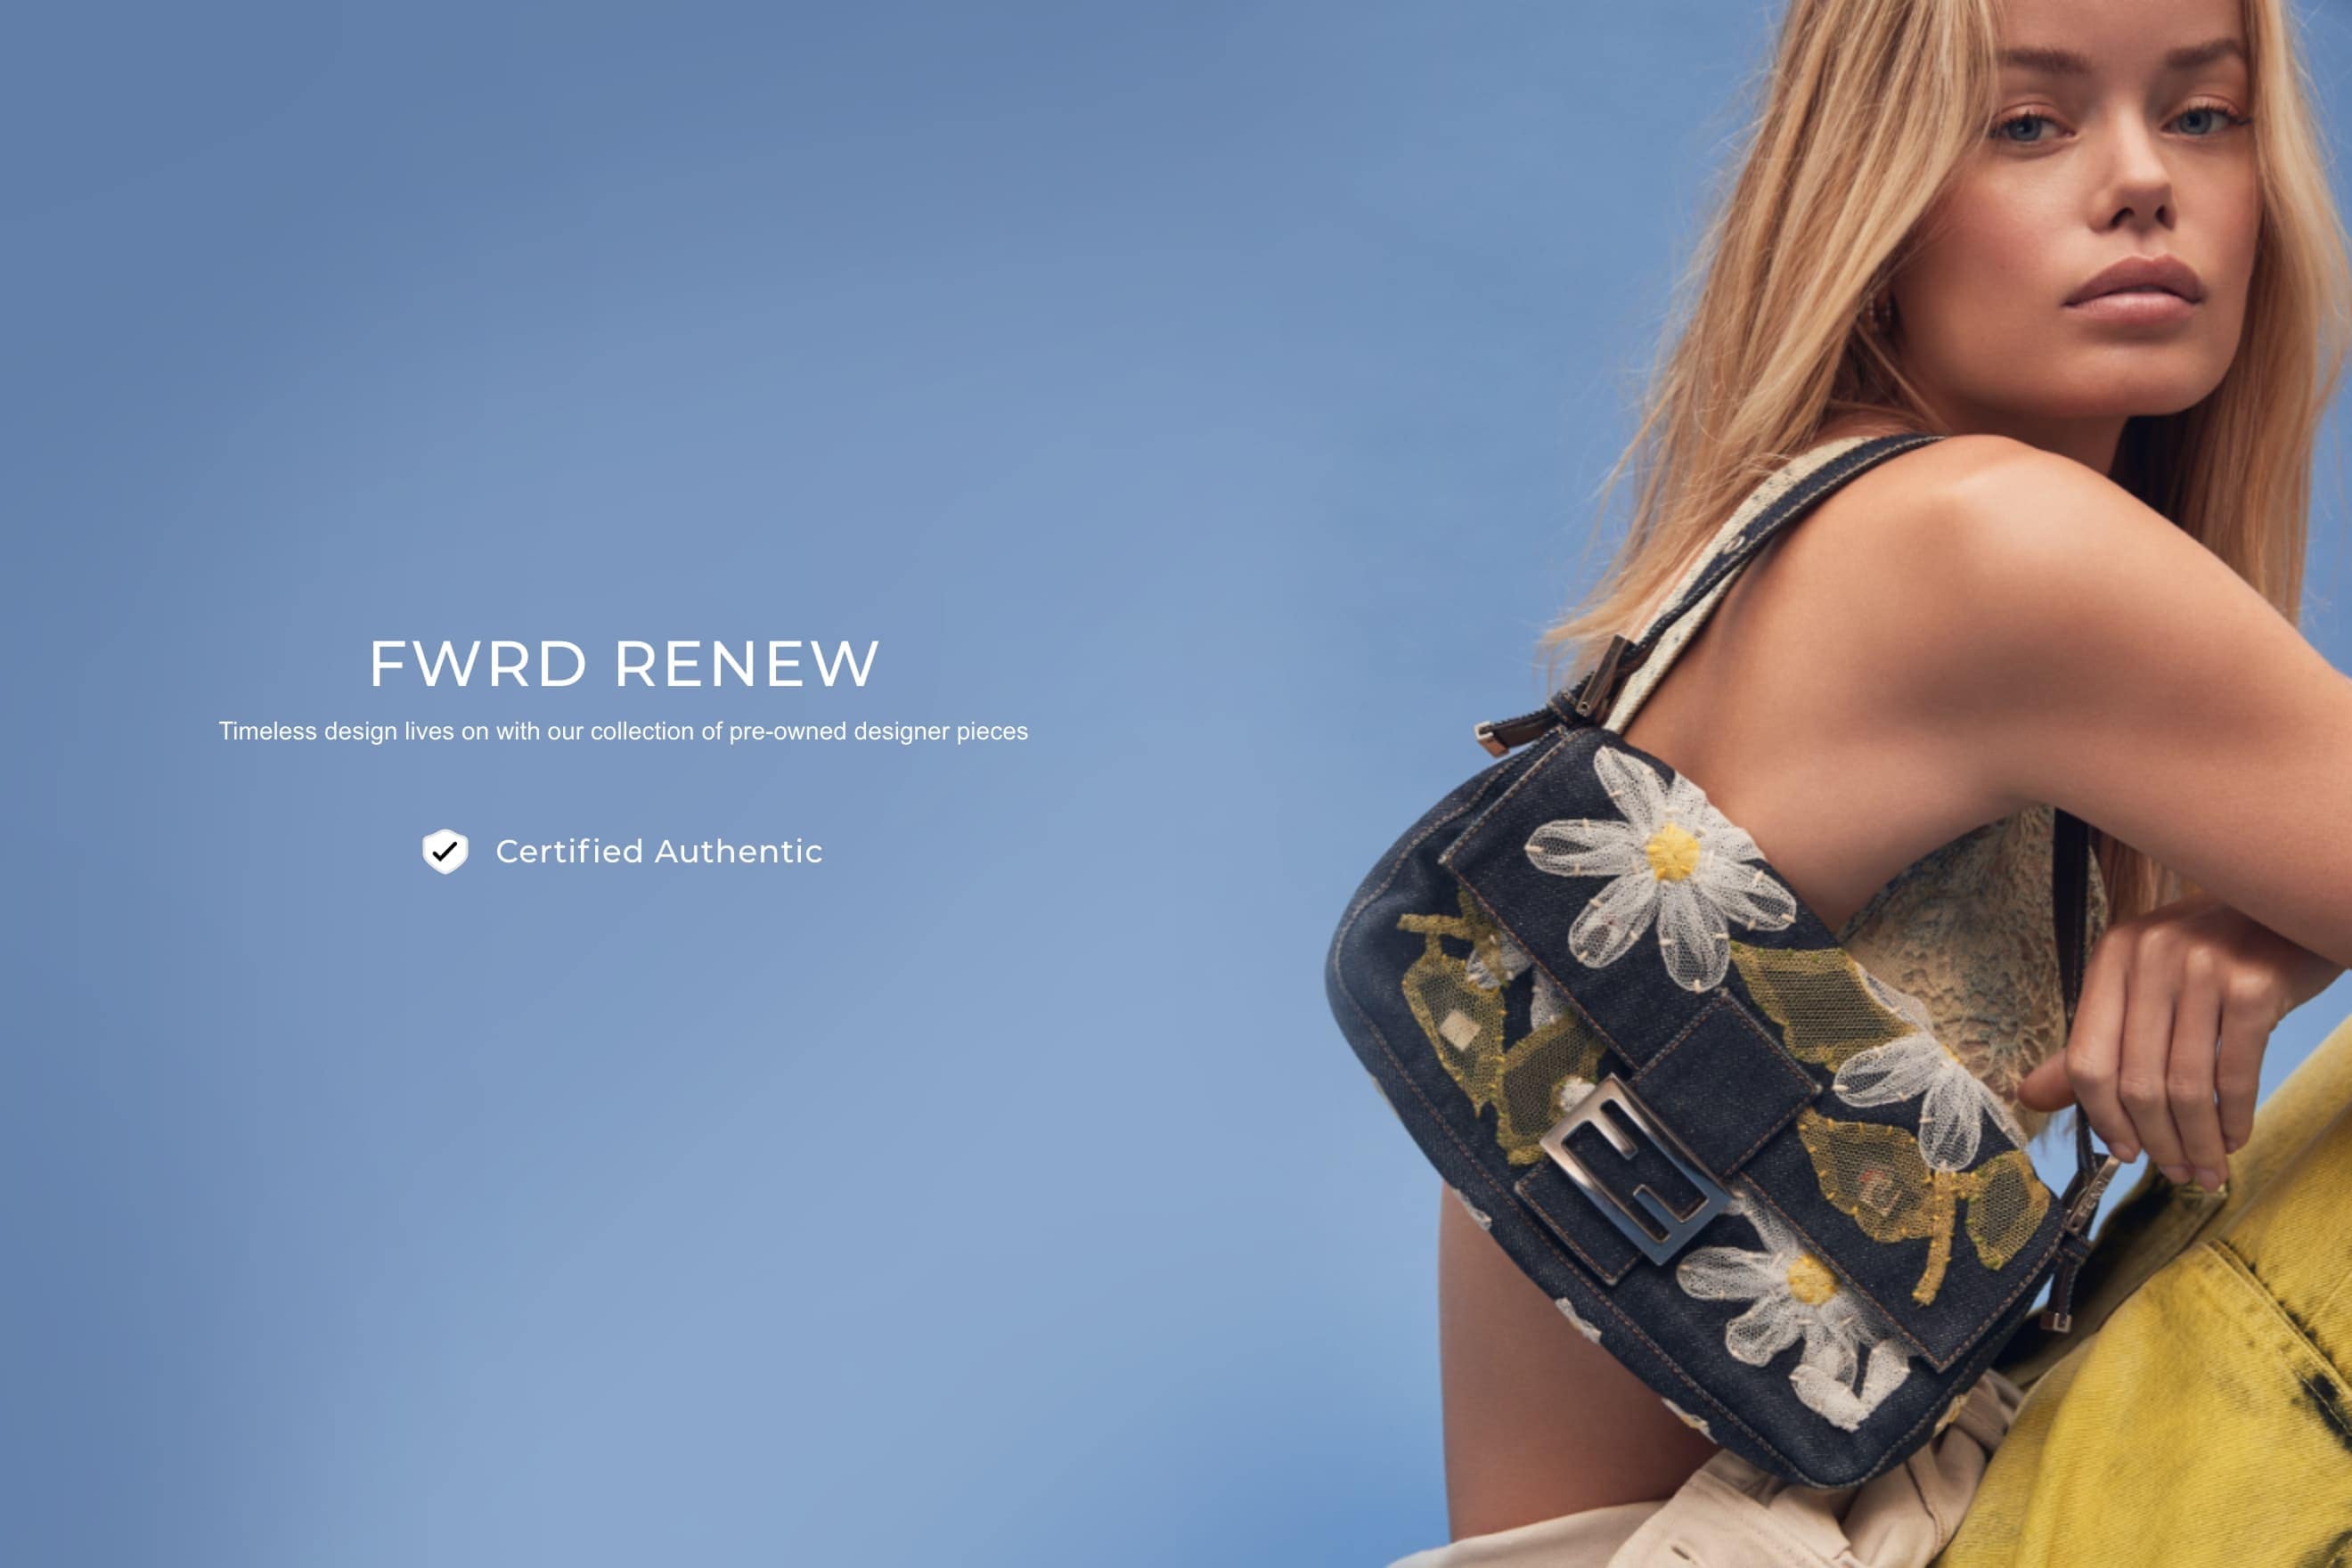 FWRD RENEW, Timeless Design lives on with our collection of pre-owned designer pieces. Certified Authentic